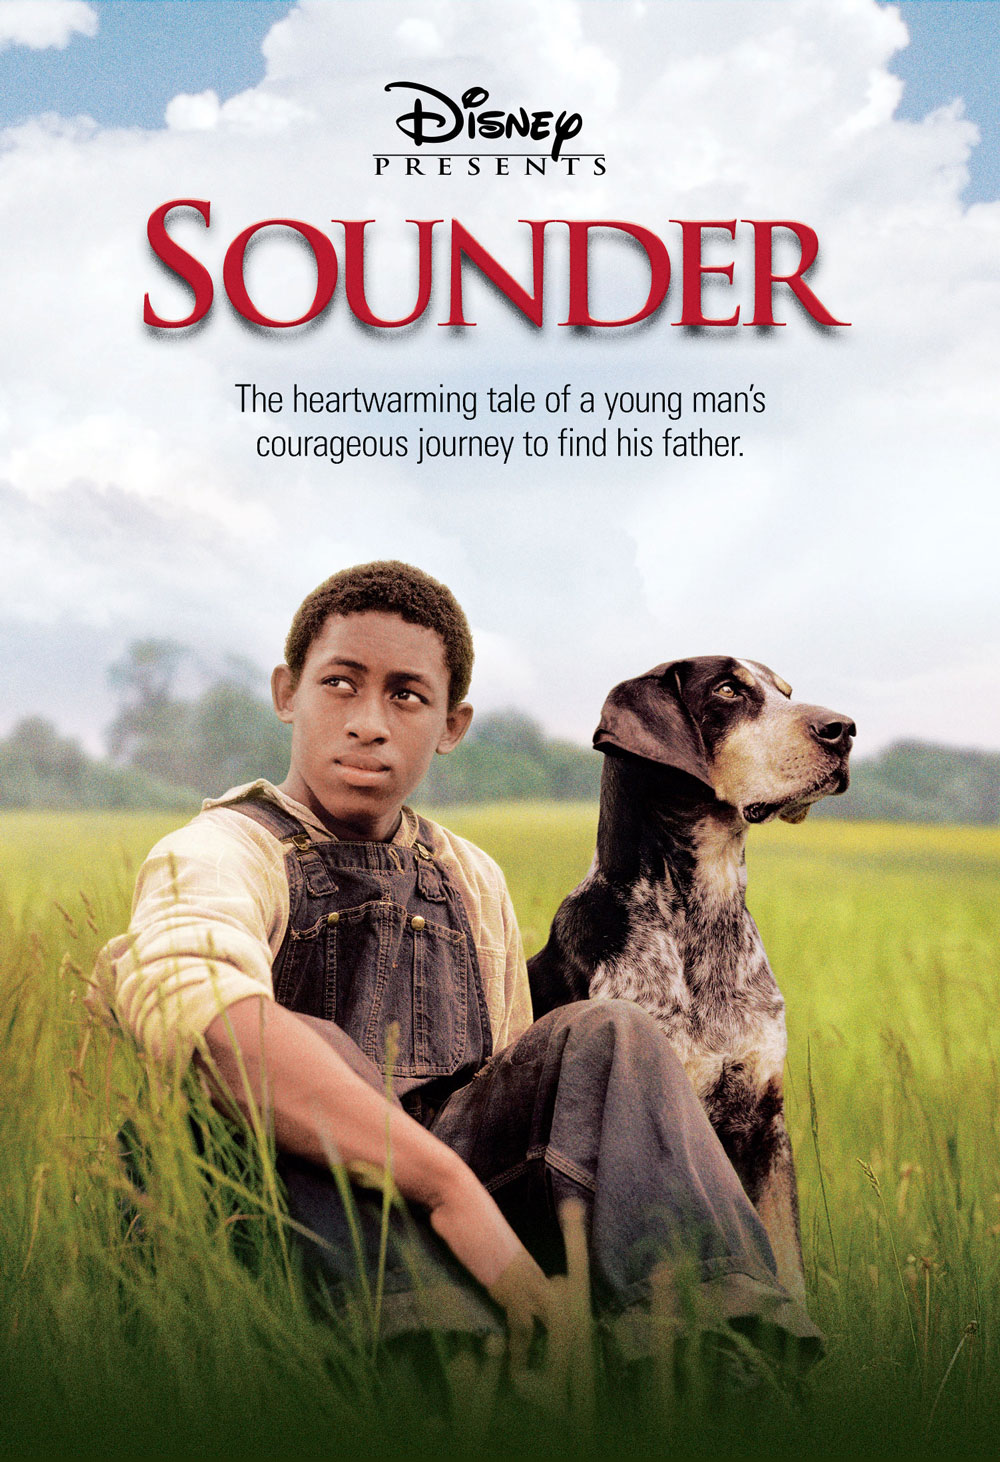 Sounder by william h armstrong book report